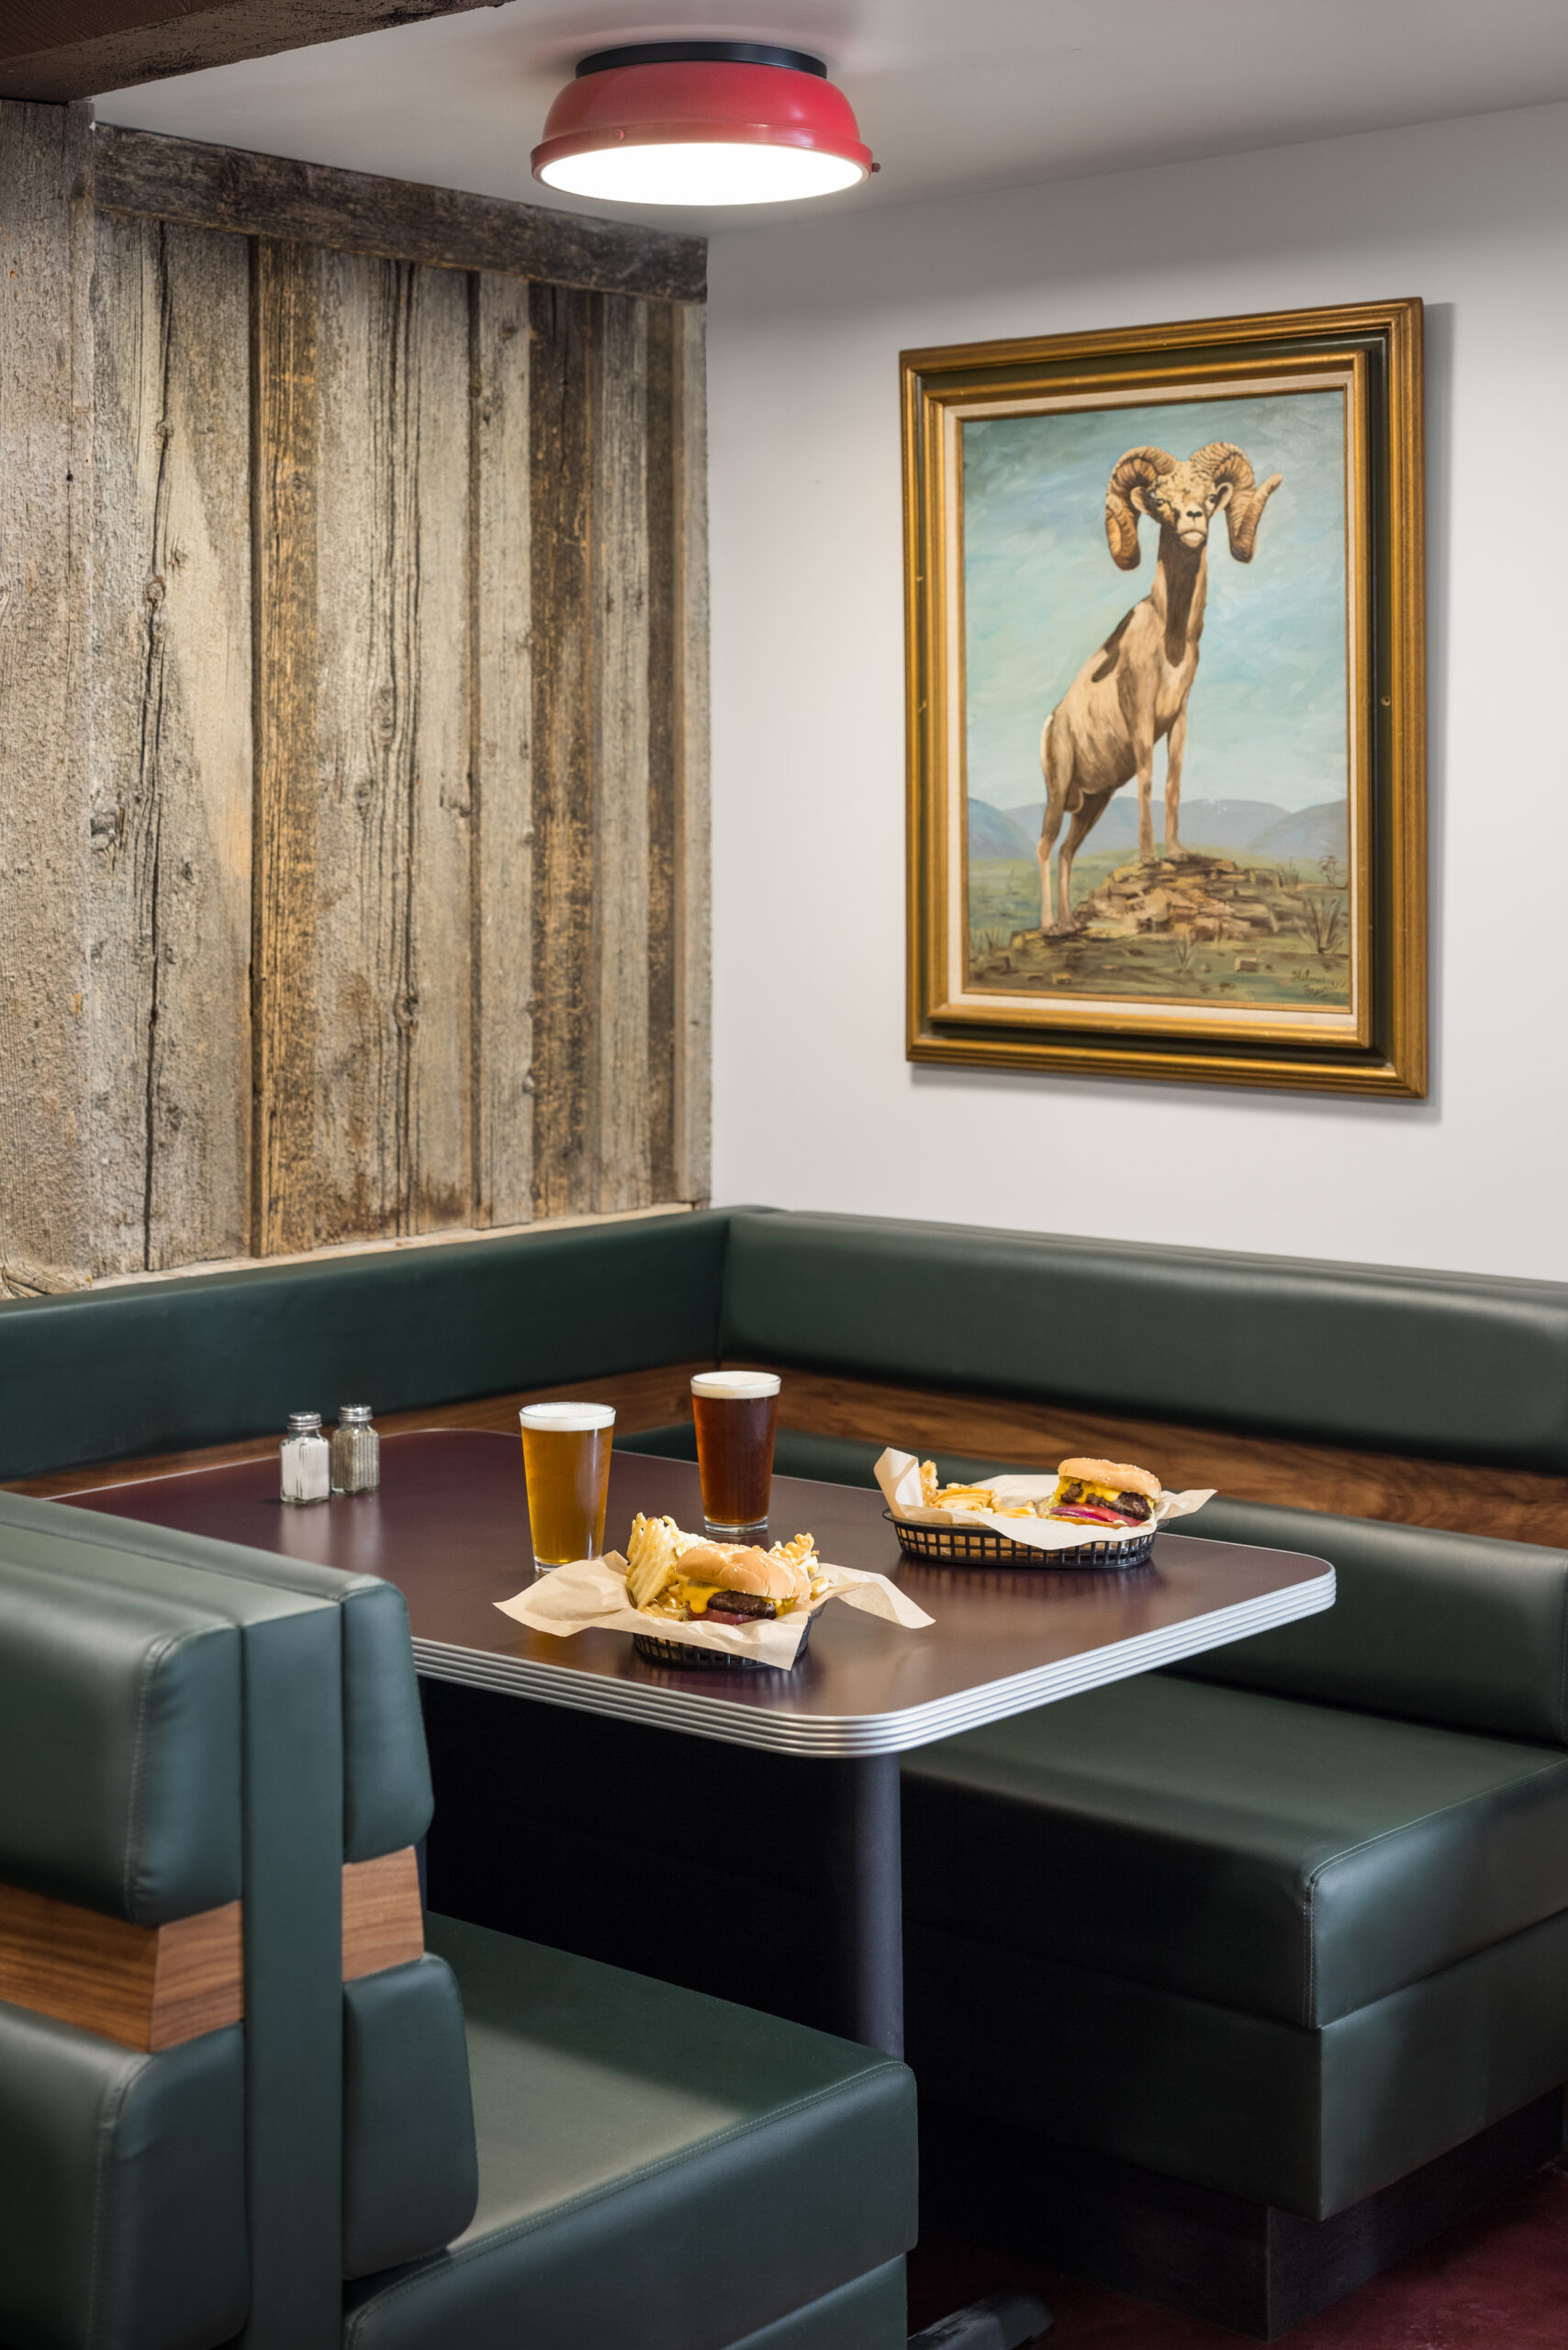 Table set with tasty breakfast, soft drinks, and a wall-mounted bighorn sheep portrait.